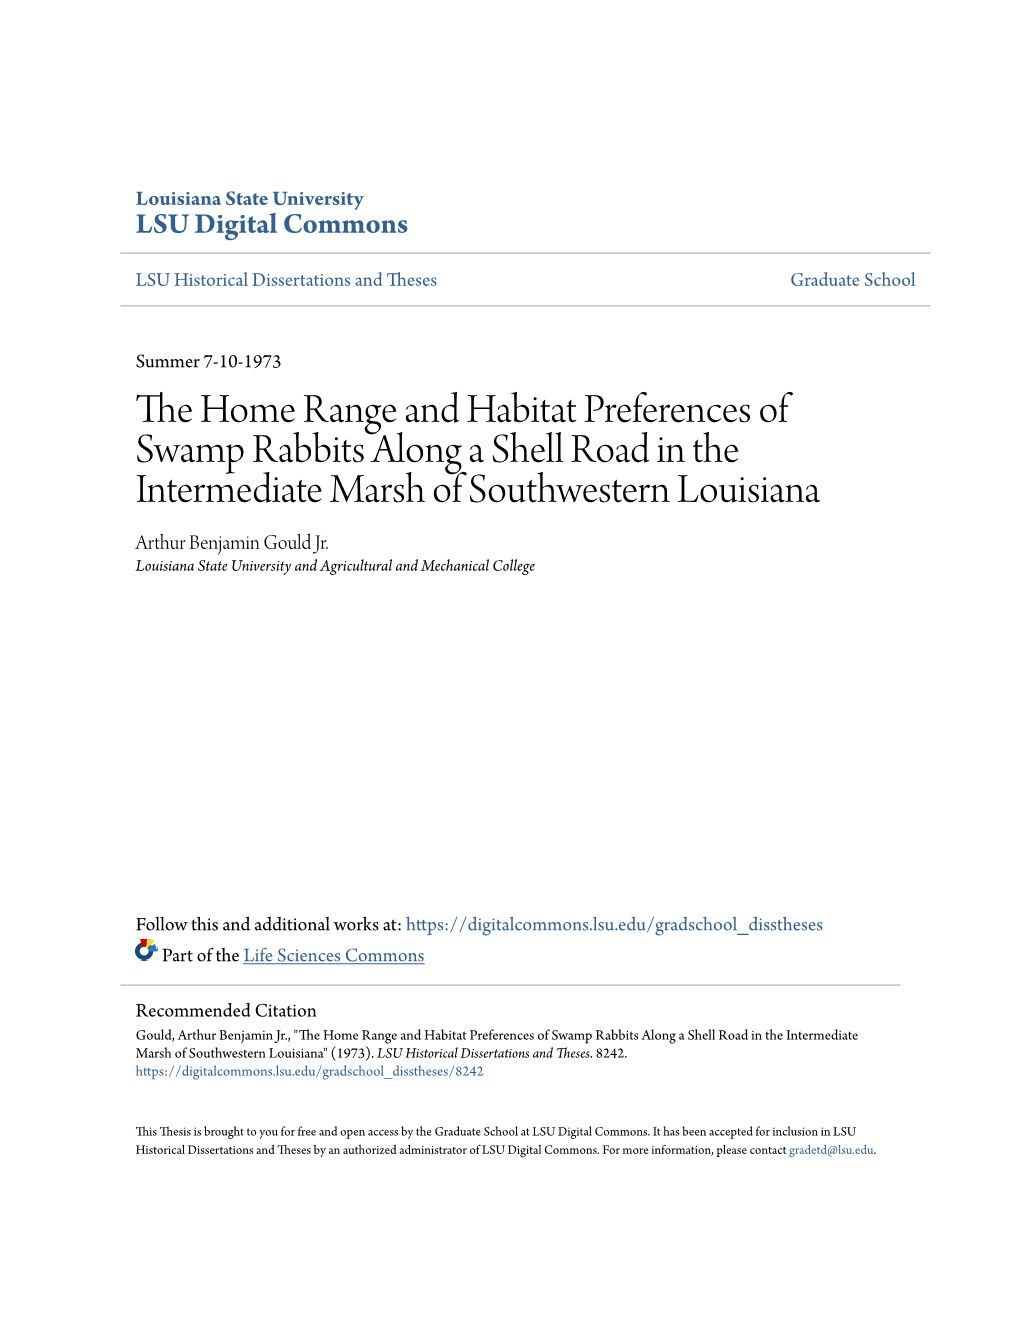 The Home Range and Habitat Preferences of Swamp Rabbits Along a Shell Road in the Intermediate Marsh of Southwestern Louisiana